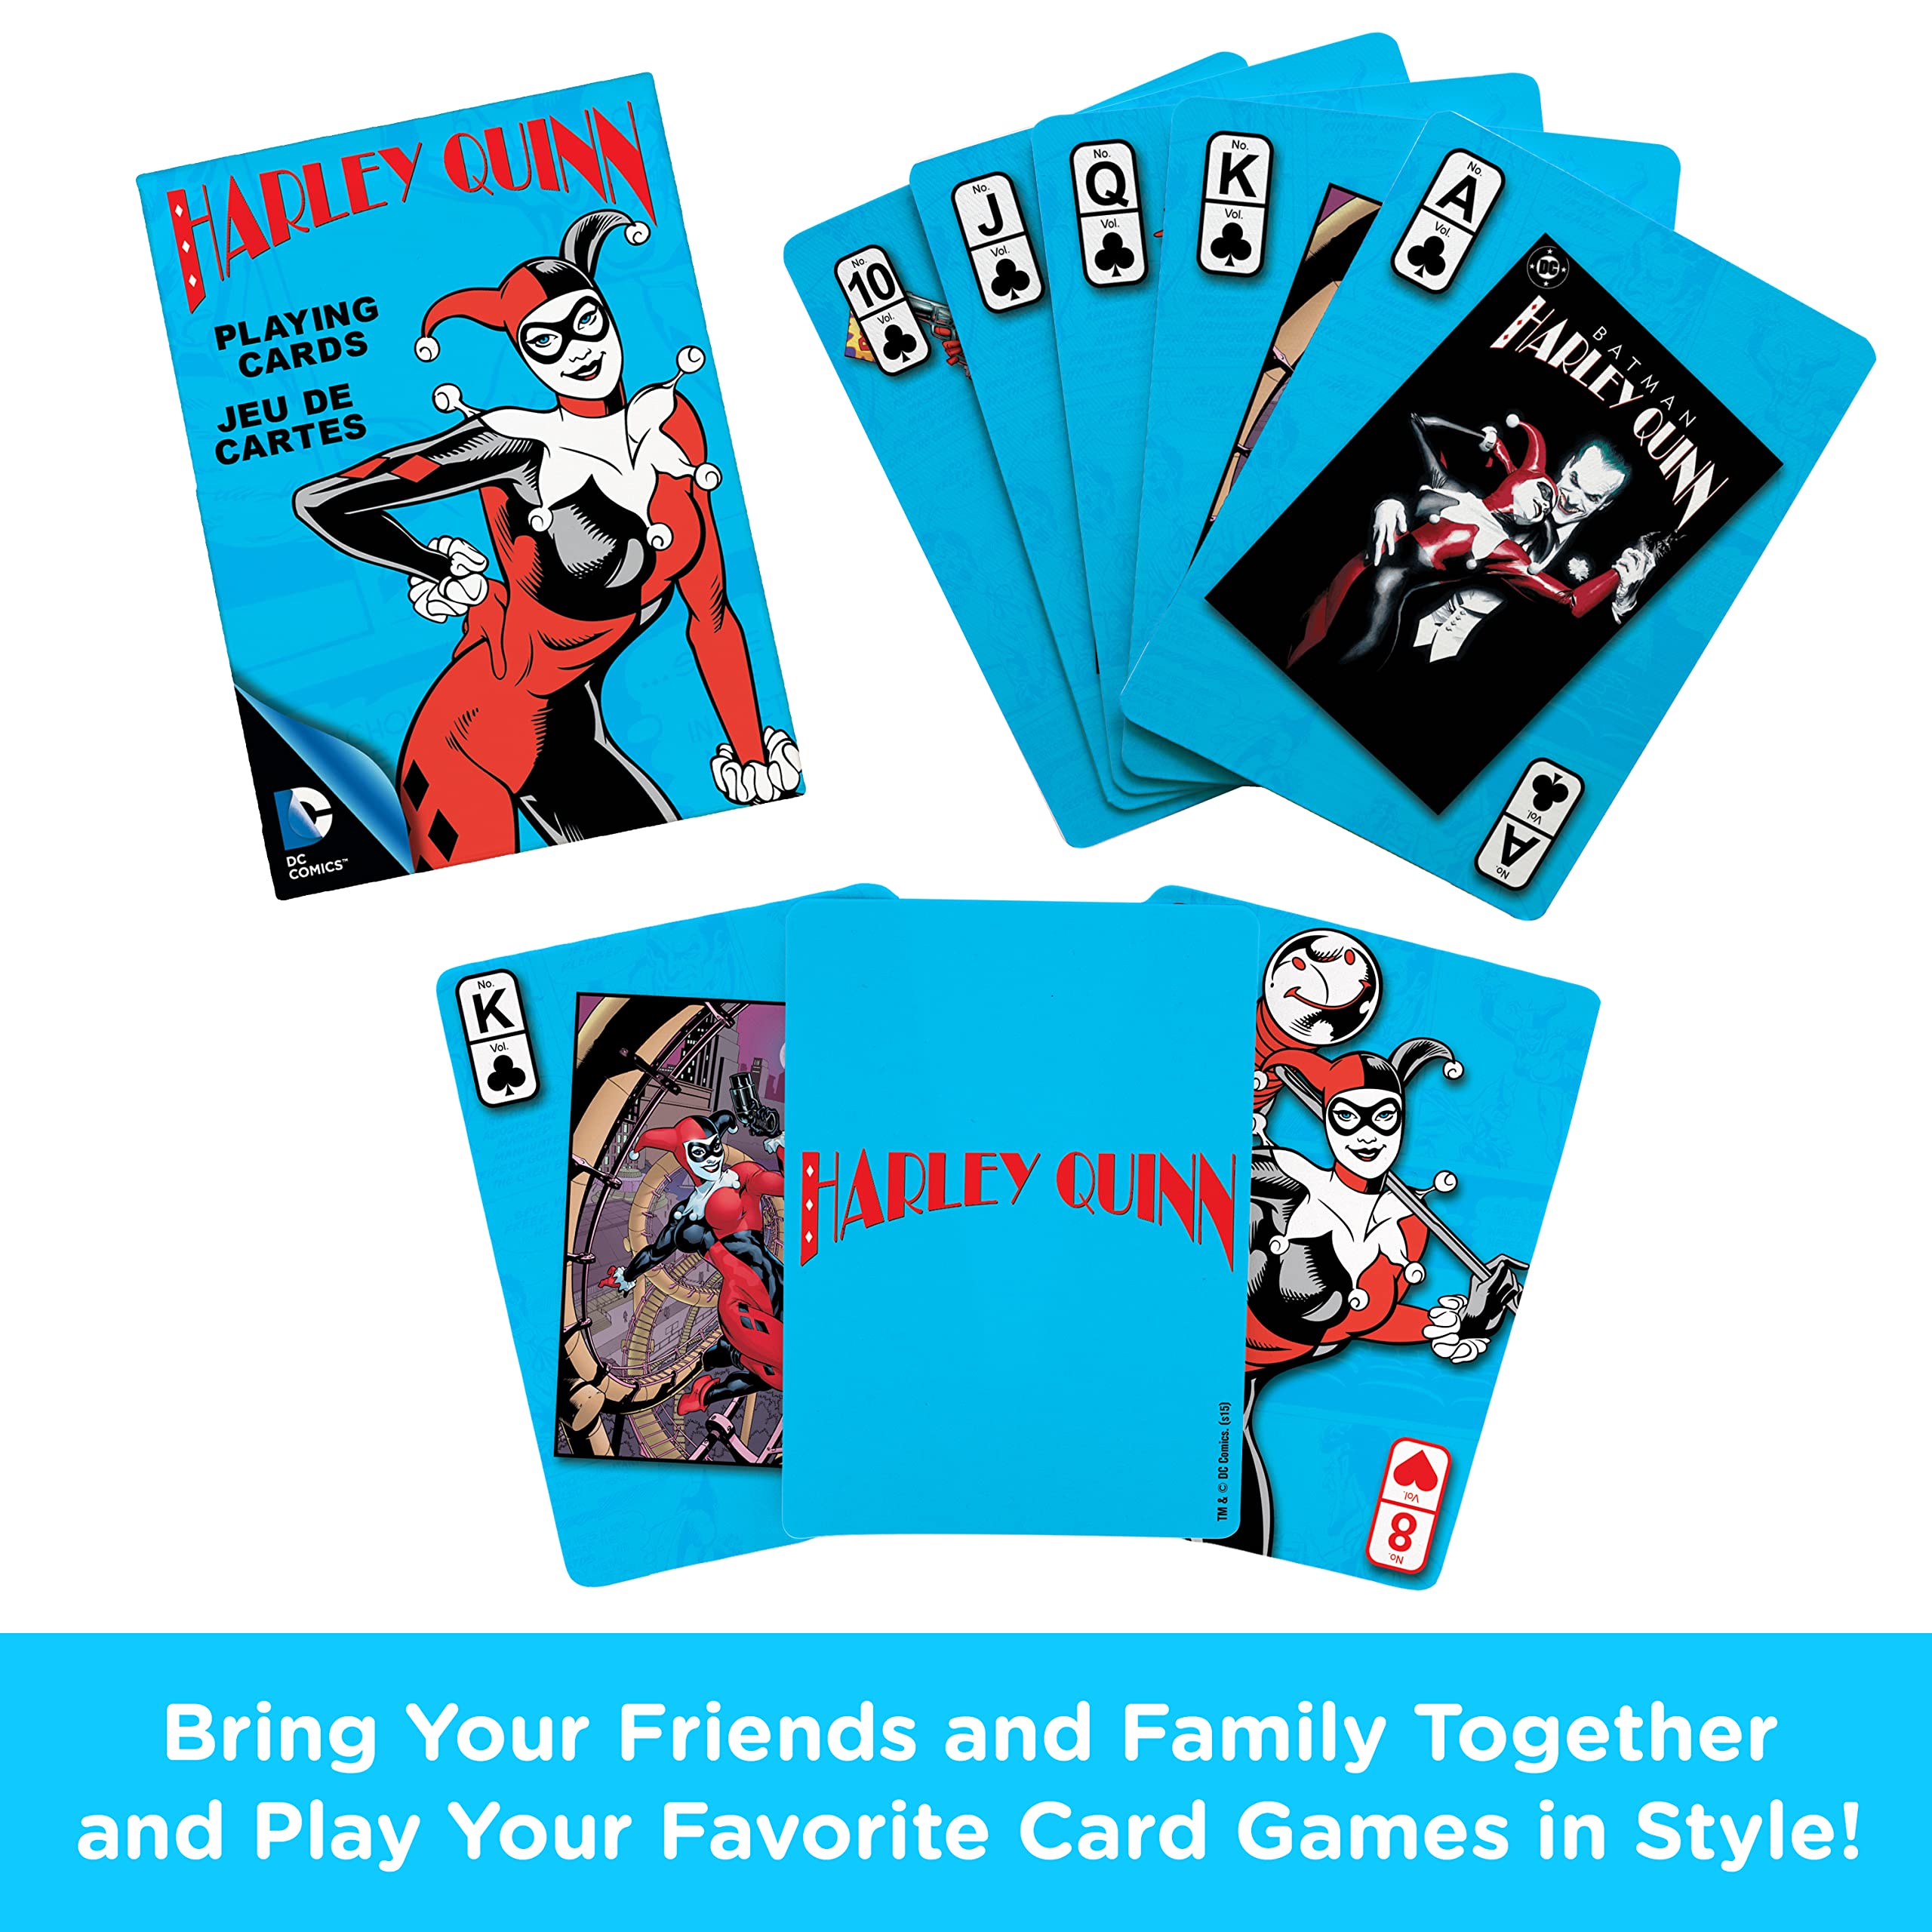 AQUARIUS DC Comics Harley Quinn Playing Cards - Harley Quinn Themed Deck of Cards - Officially Licensed DC Comics Merchandise & Collectibles